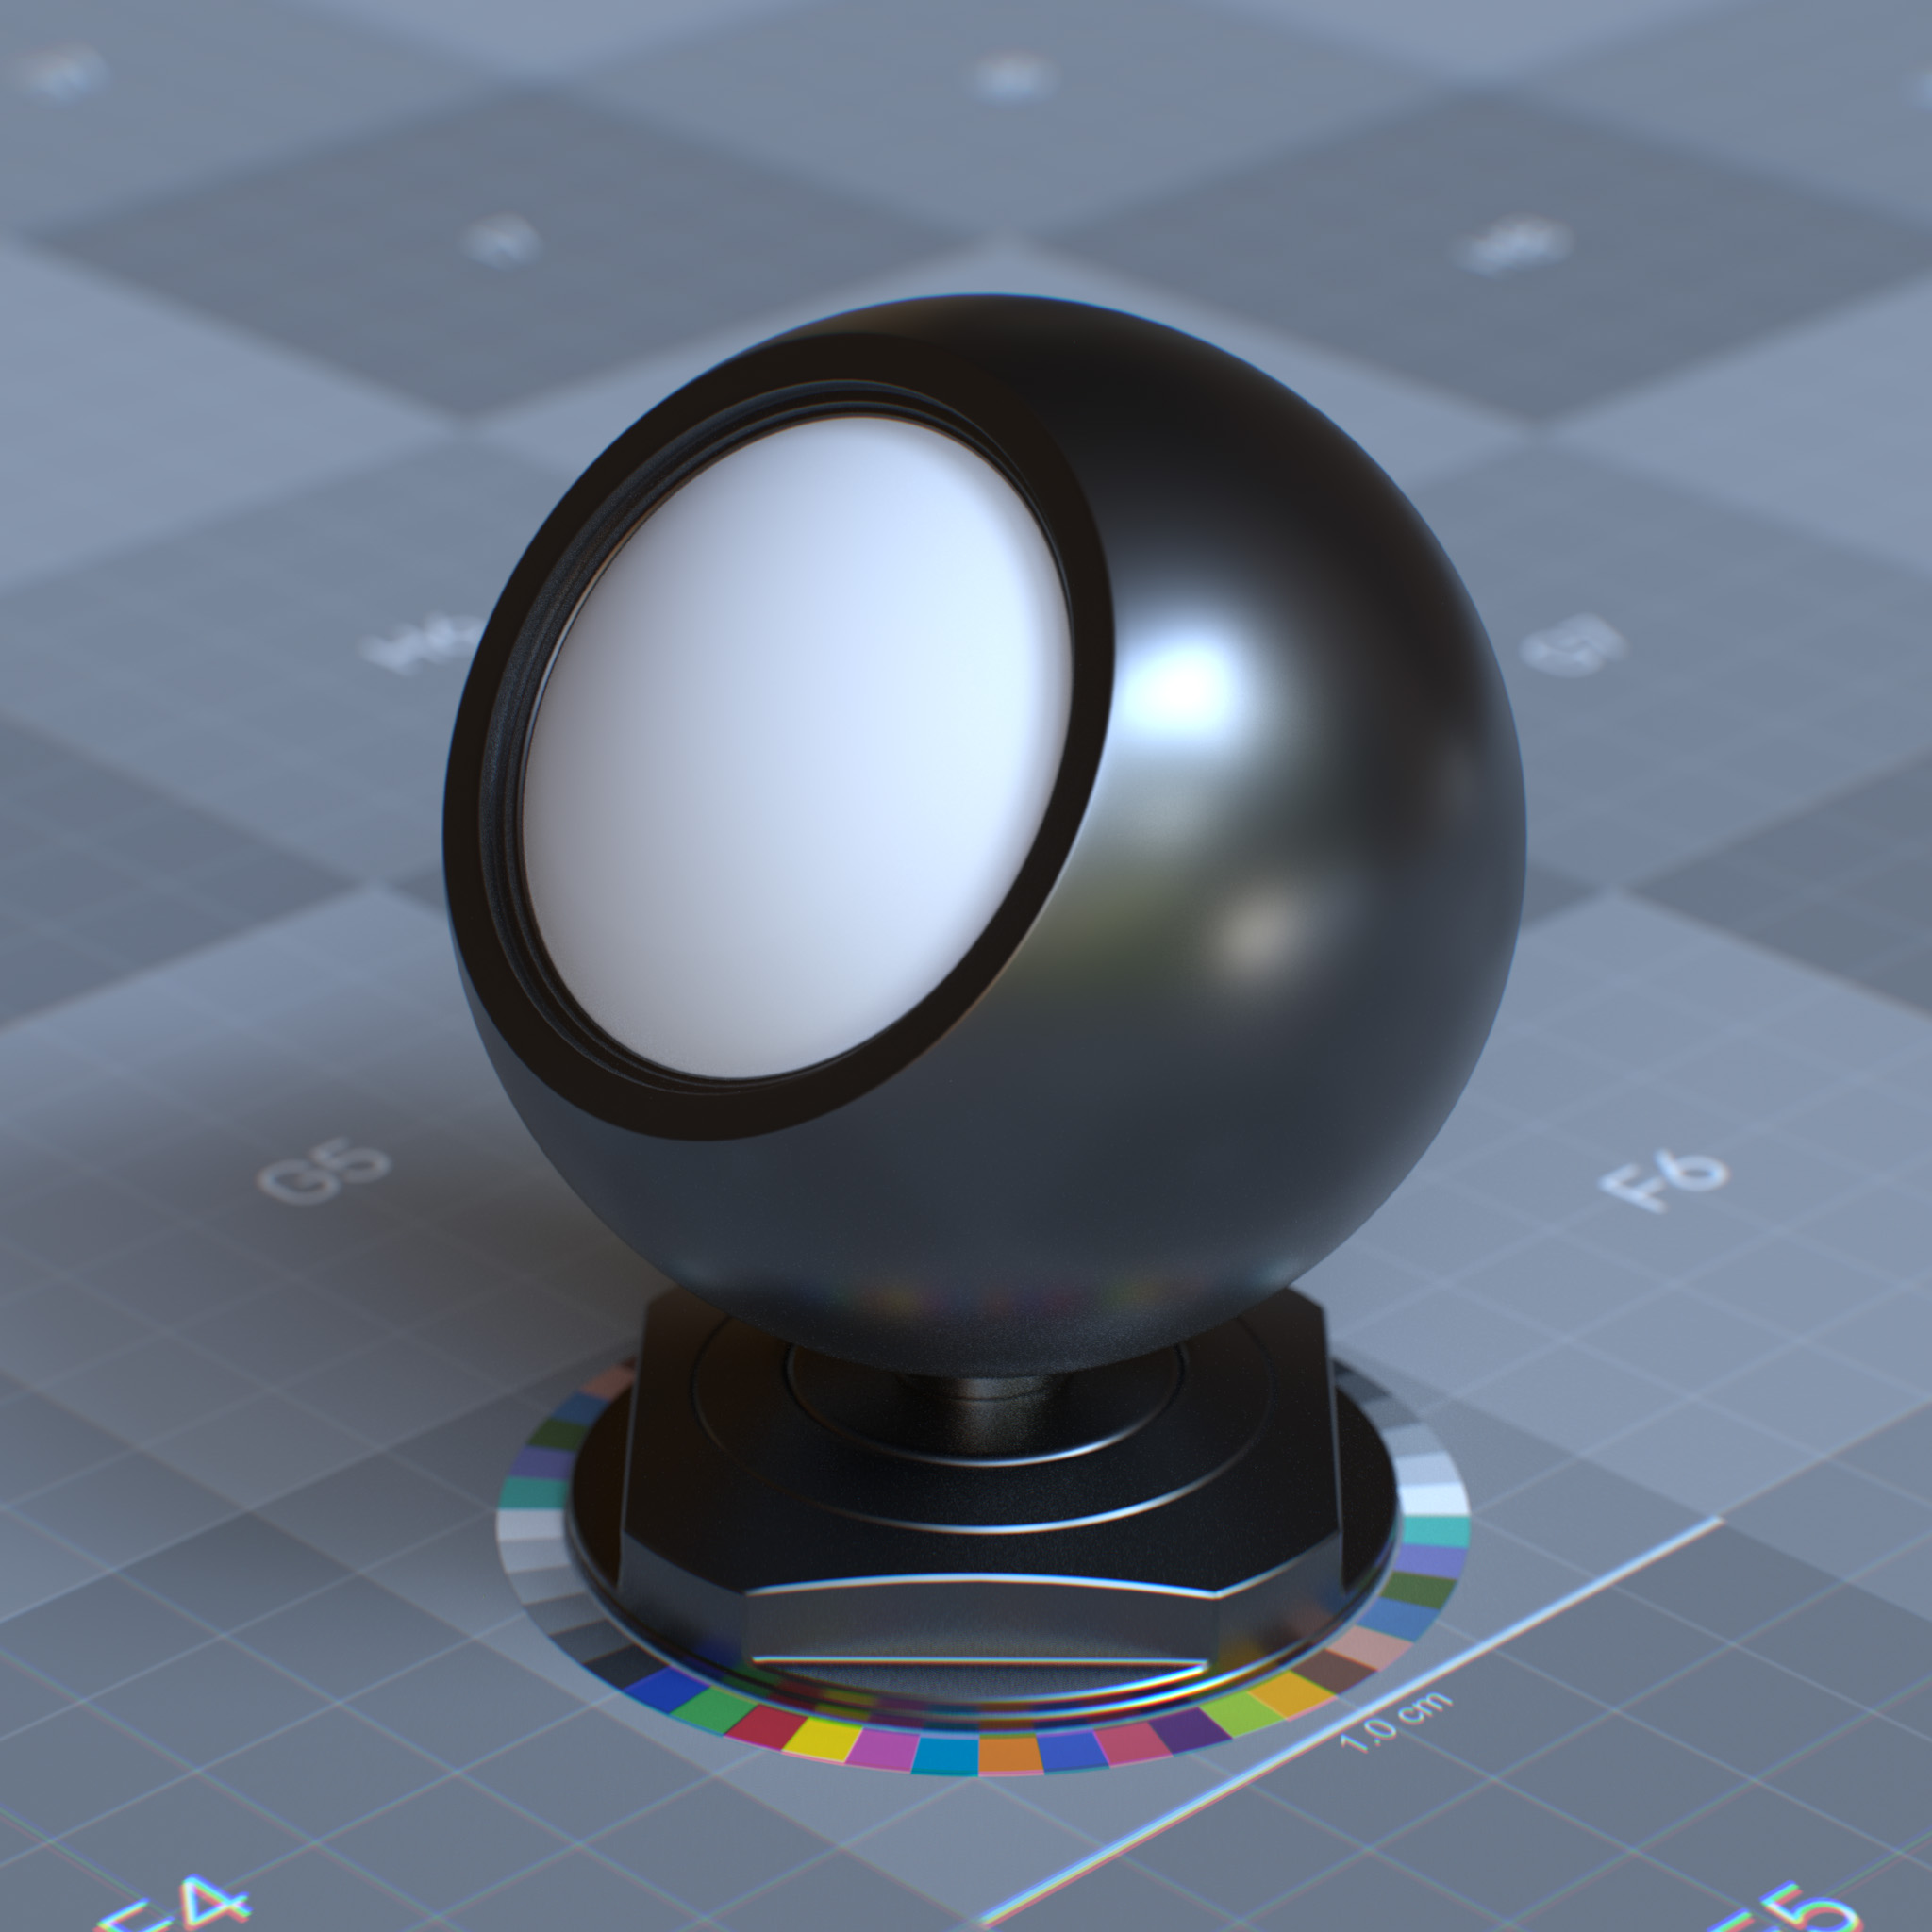 rtx_material_omnisurfacebase_specular_reflection_weight_0p0_metalness_edge_tint